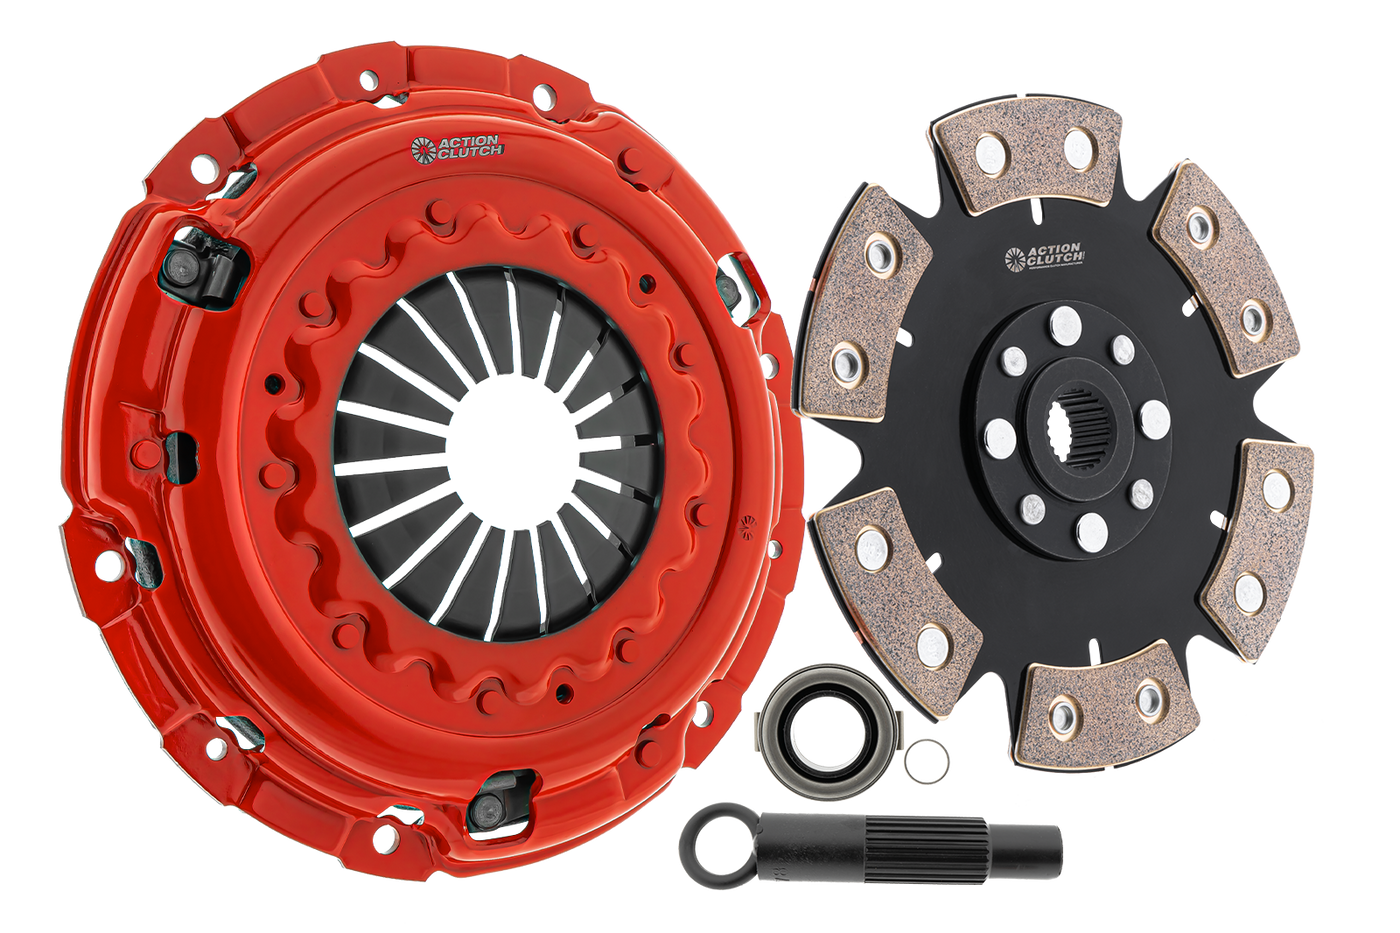 Stage 6 Clutch Kit (2MD) for Plymouth Laser 1990-1994 2.0L DOHC (4G63) Non-Turbo FWD